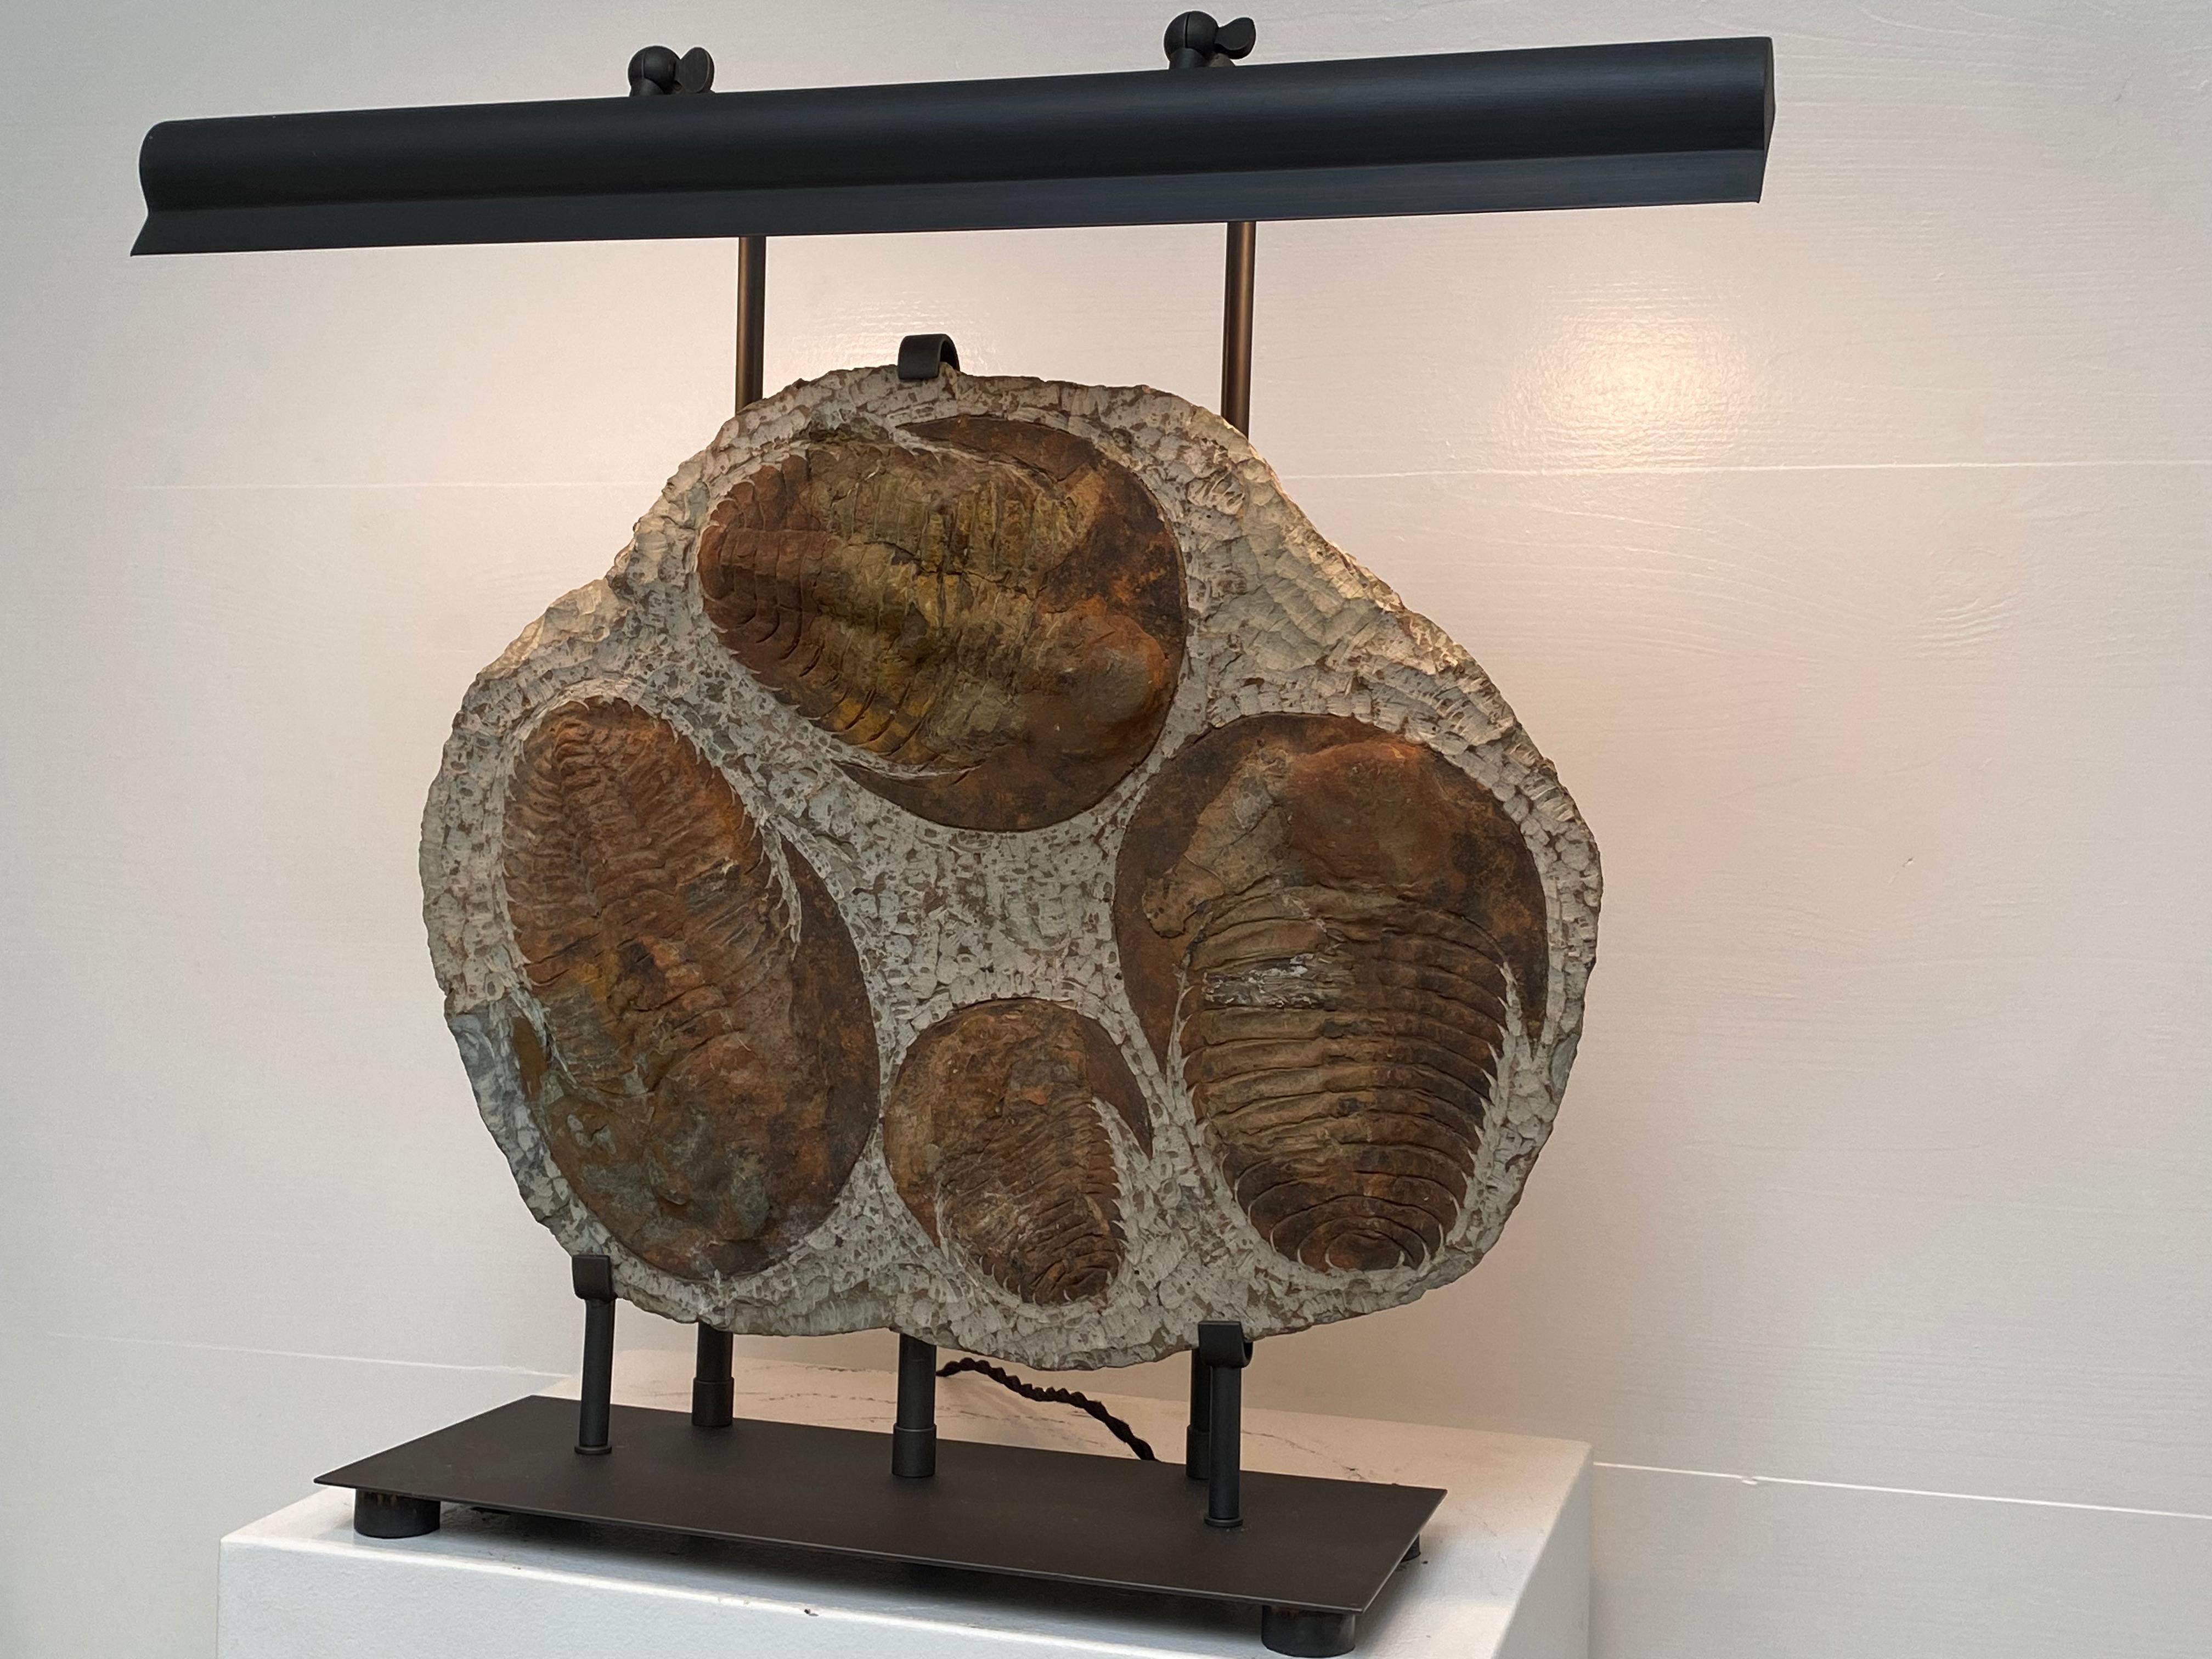 Exceptional lamp made of 4 Trilobita Fossils,mounted on an iron modern base
3 elements for lamps, movable lamp shade,
very decorative for a library or study